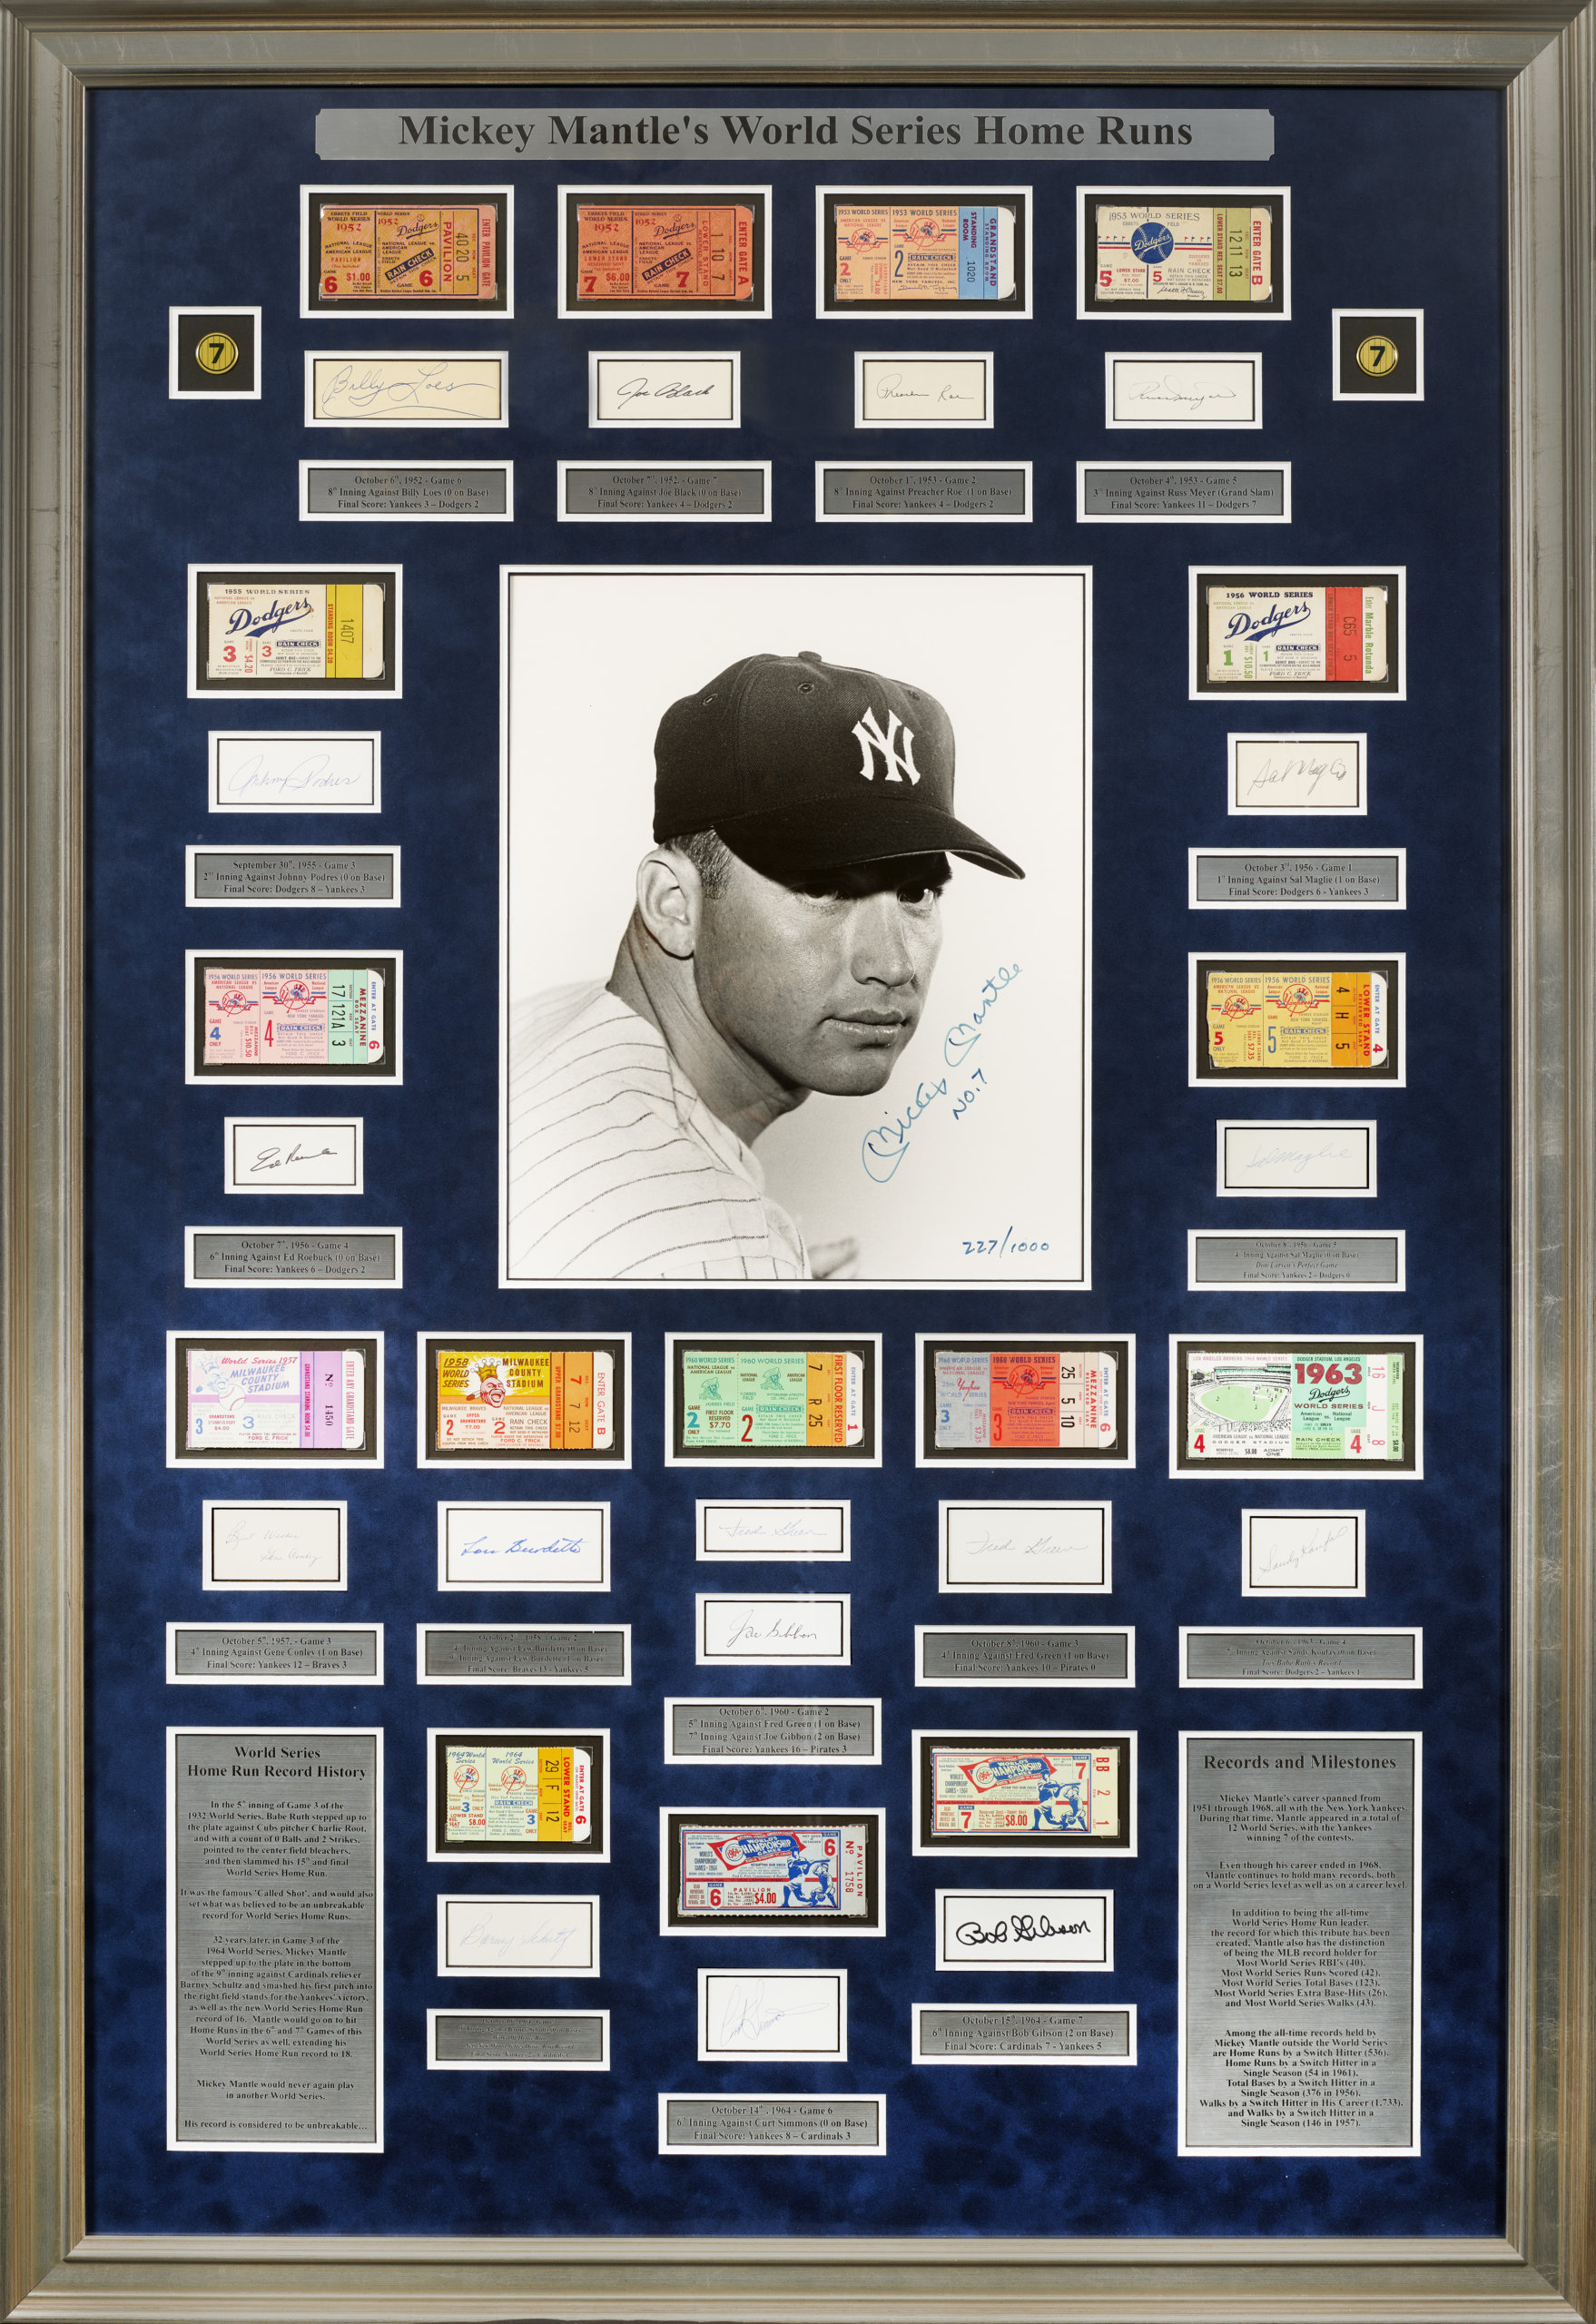 Mickey Mantle World Series home runs are chronicled in this "Sports Conversation Art" piece